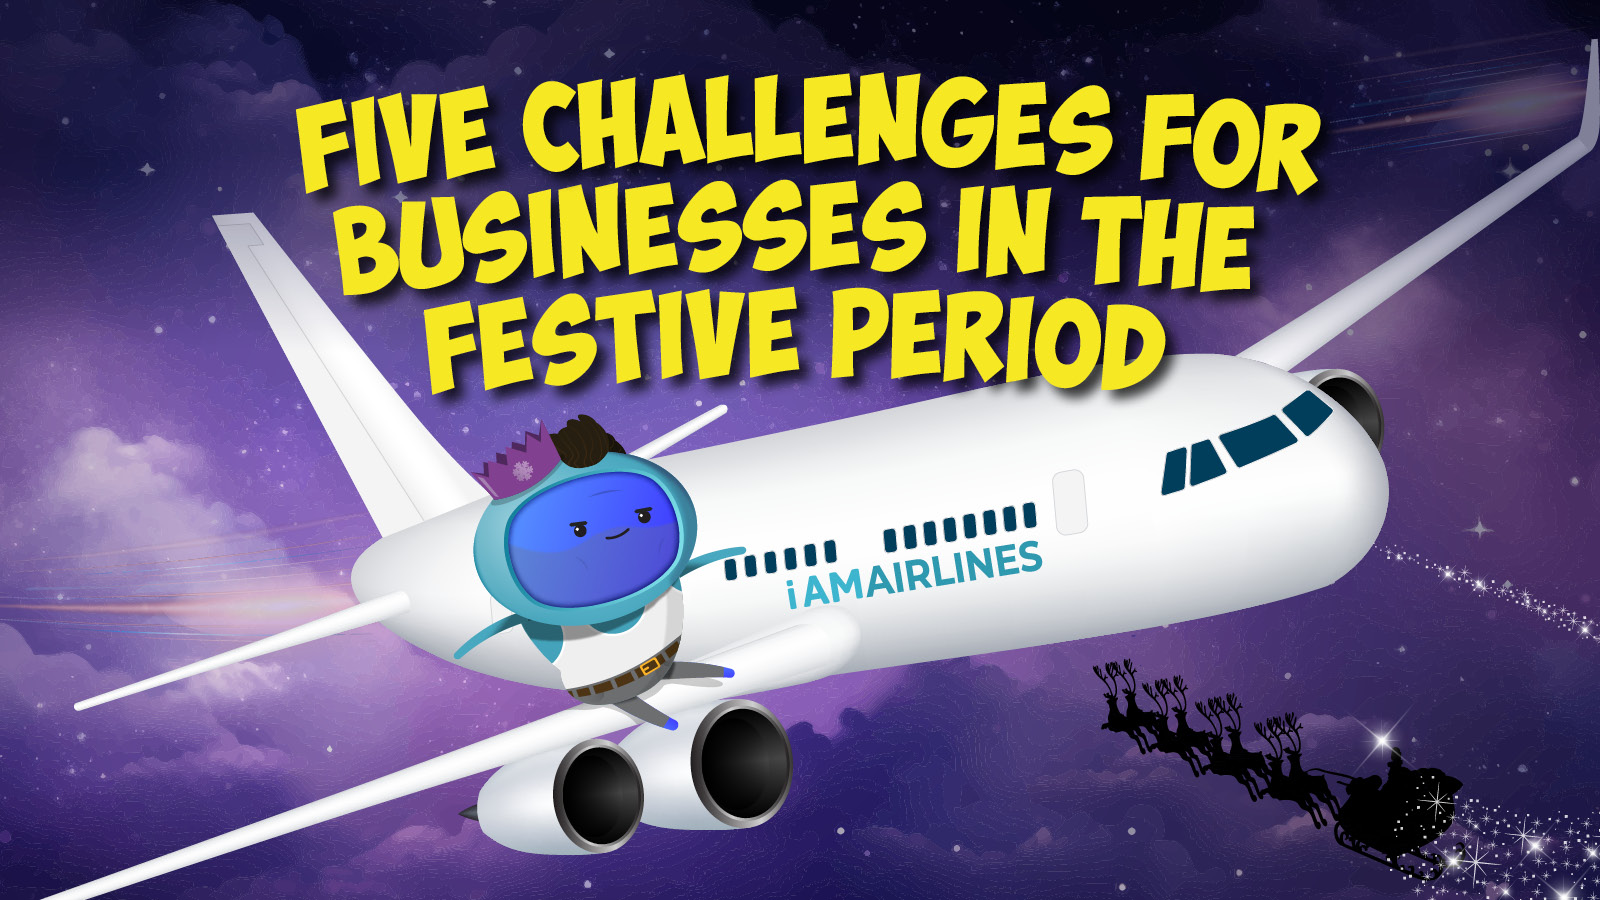 Five Challenges for Businesses in the Festive Period 1600x900